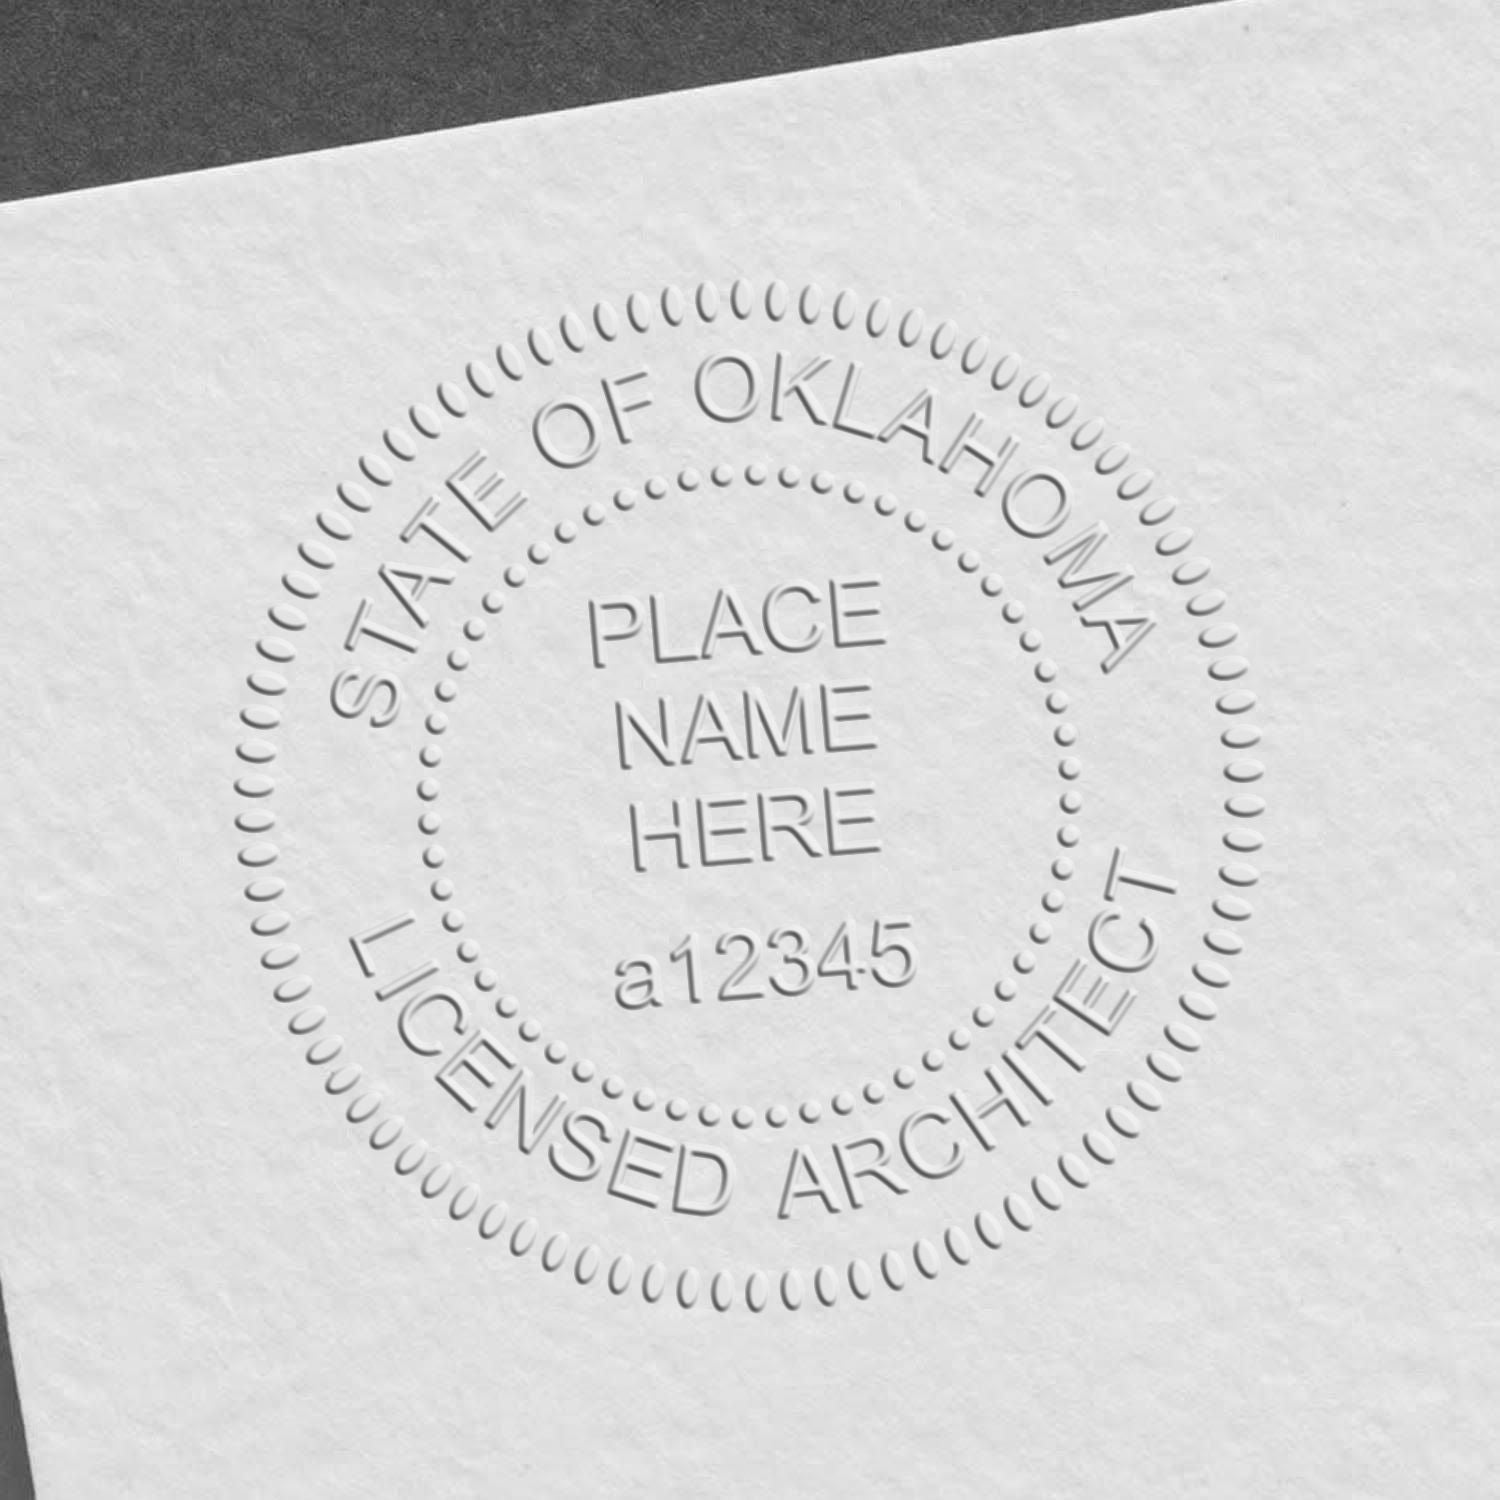 A lifestyle photo showing a stamped image of the Oklahoma Desk Architect Embossing Seal on a piece of paper